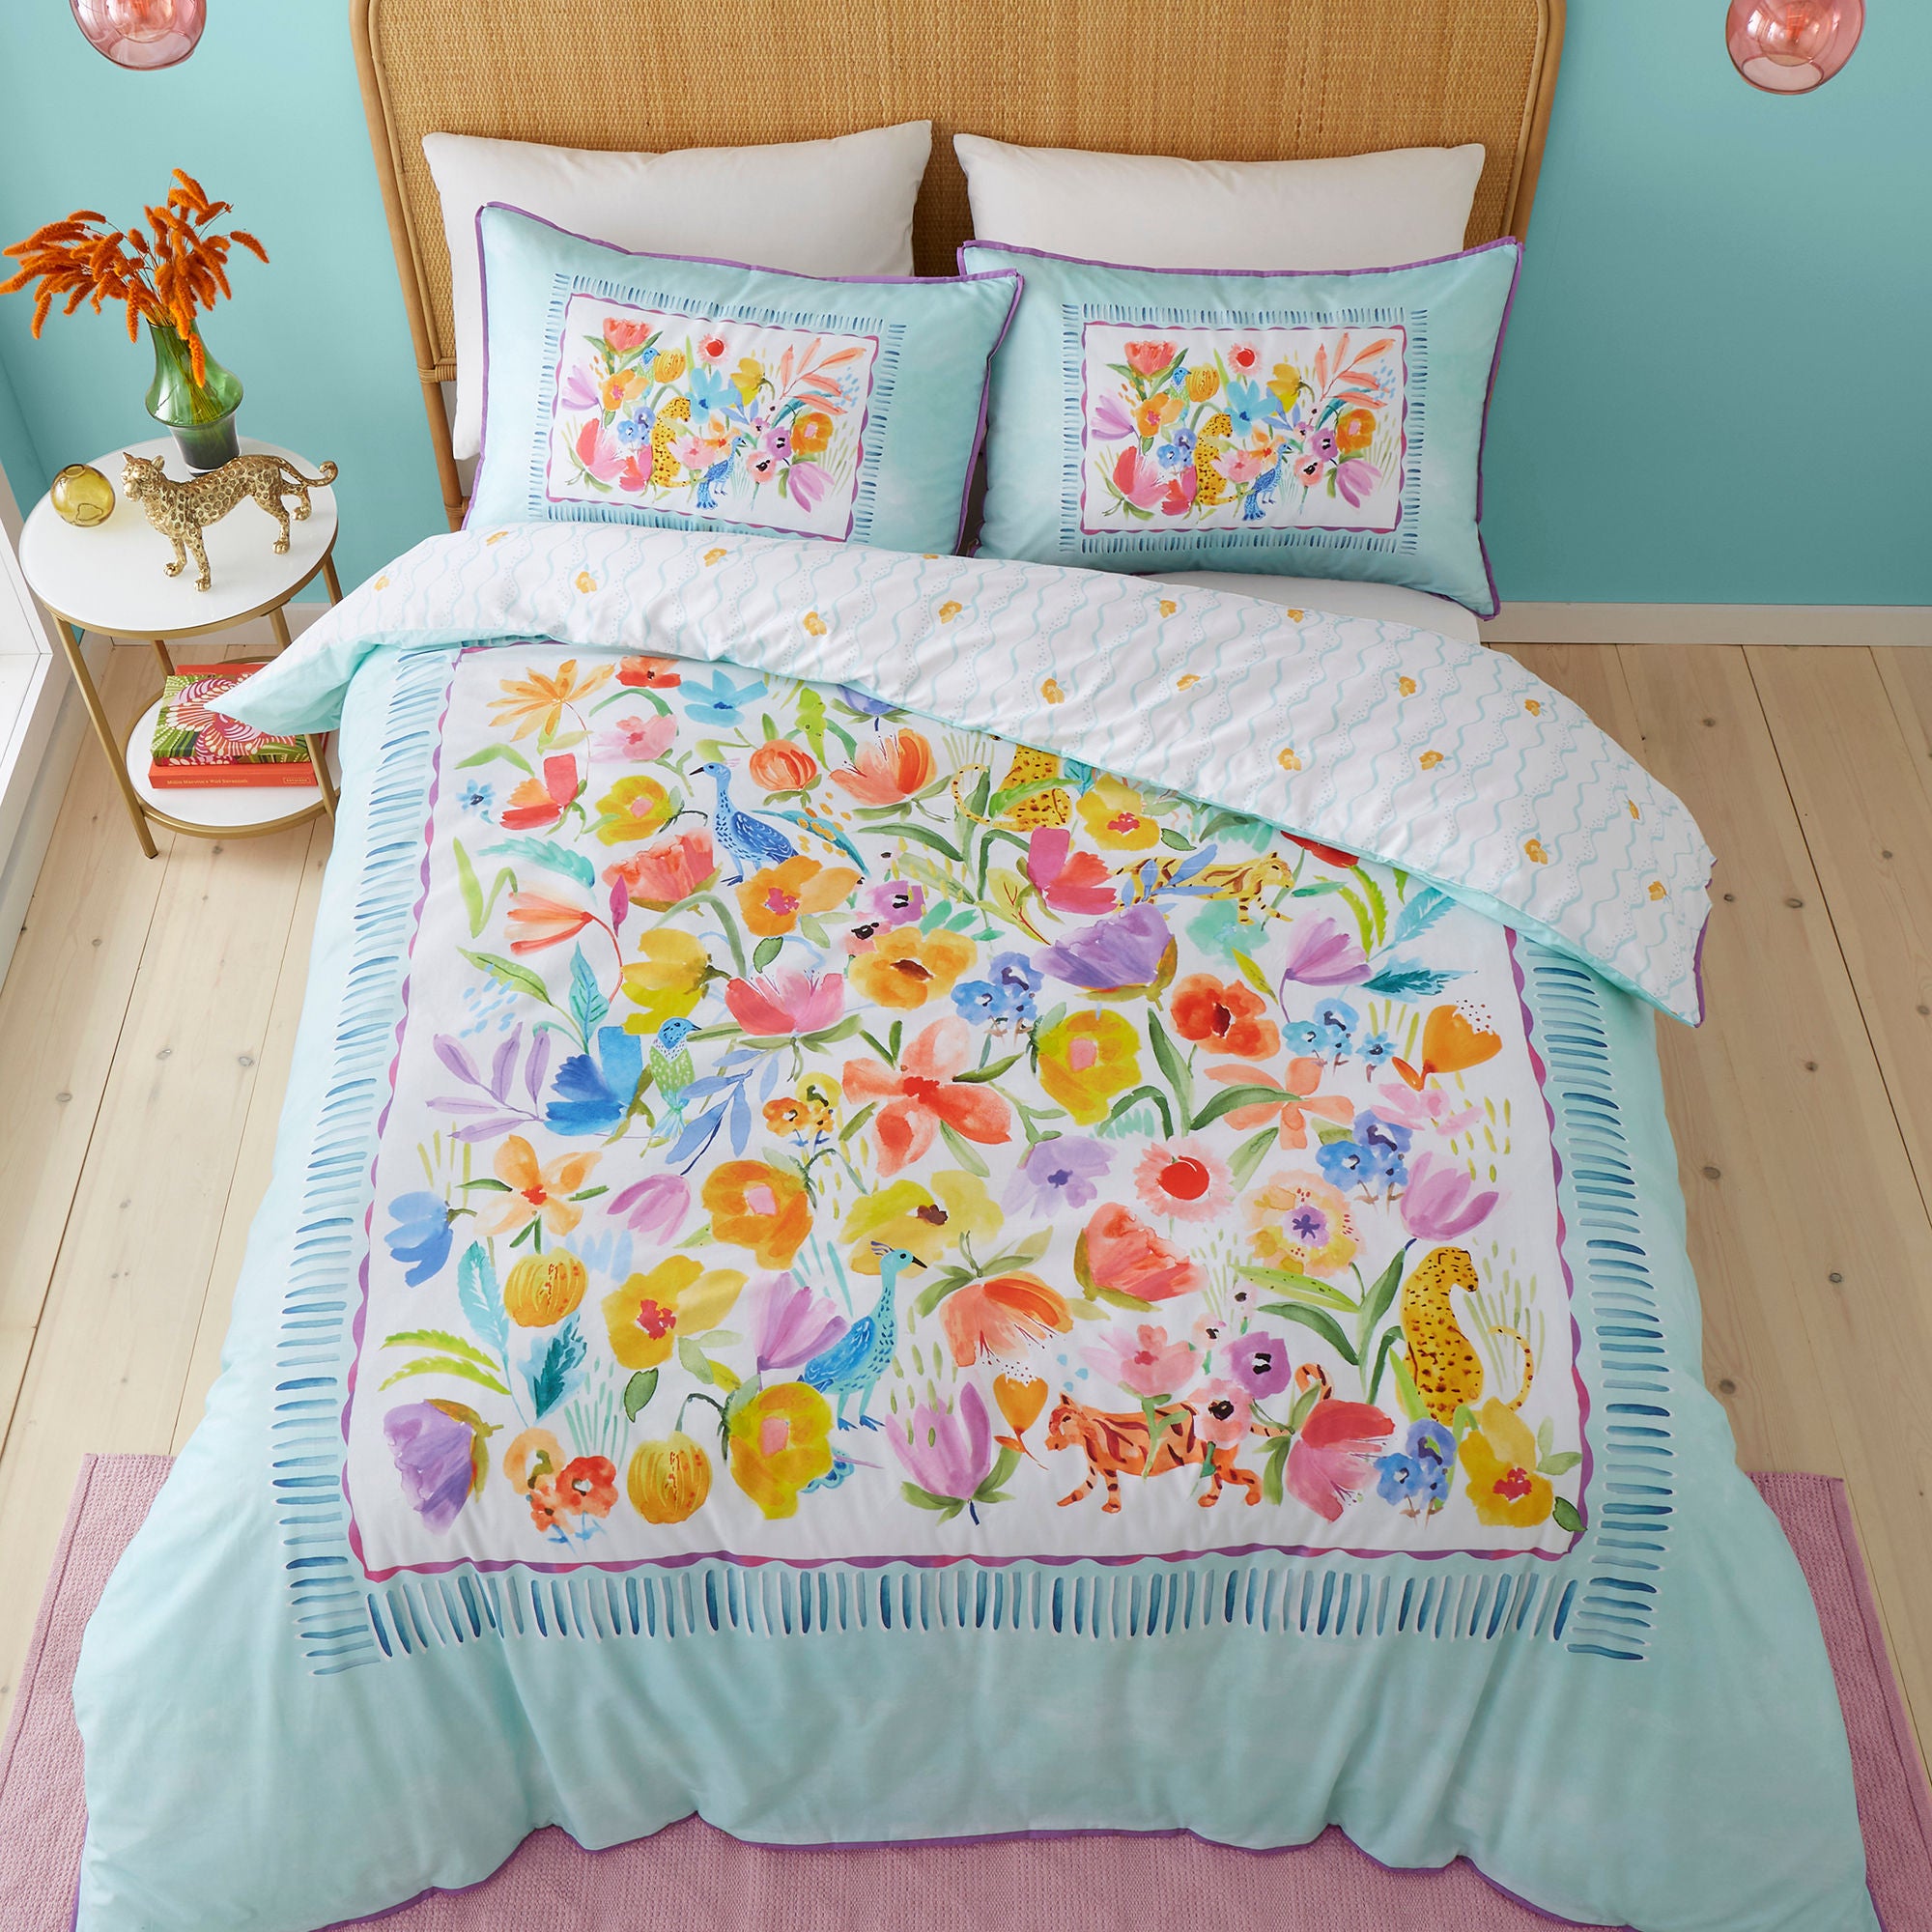 Festival Duvet Cover Set by Appletree Style in Duck Egg - Duvet Cover Set - Appletree Style